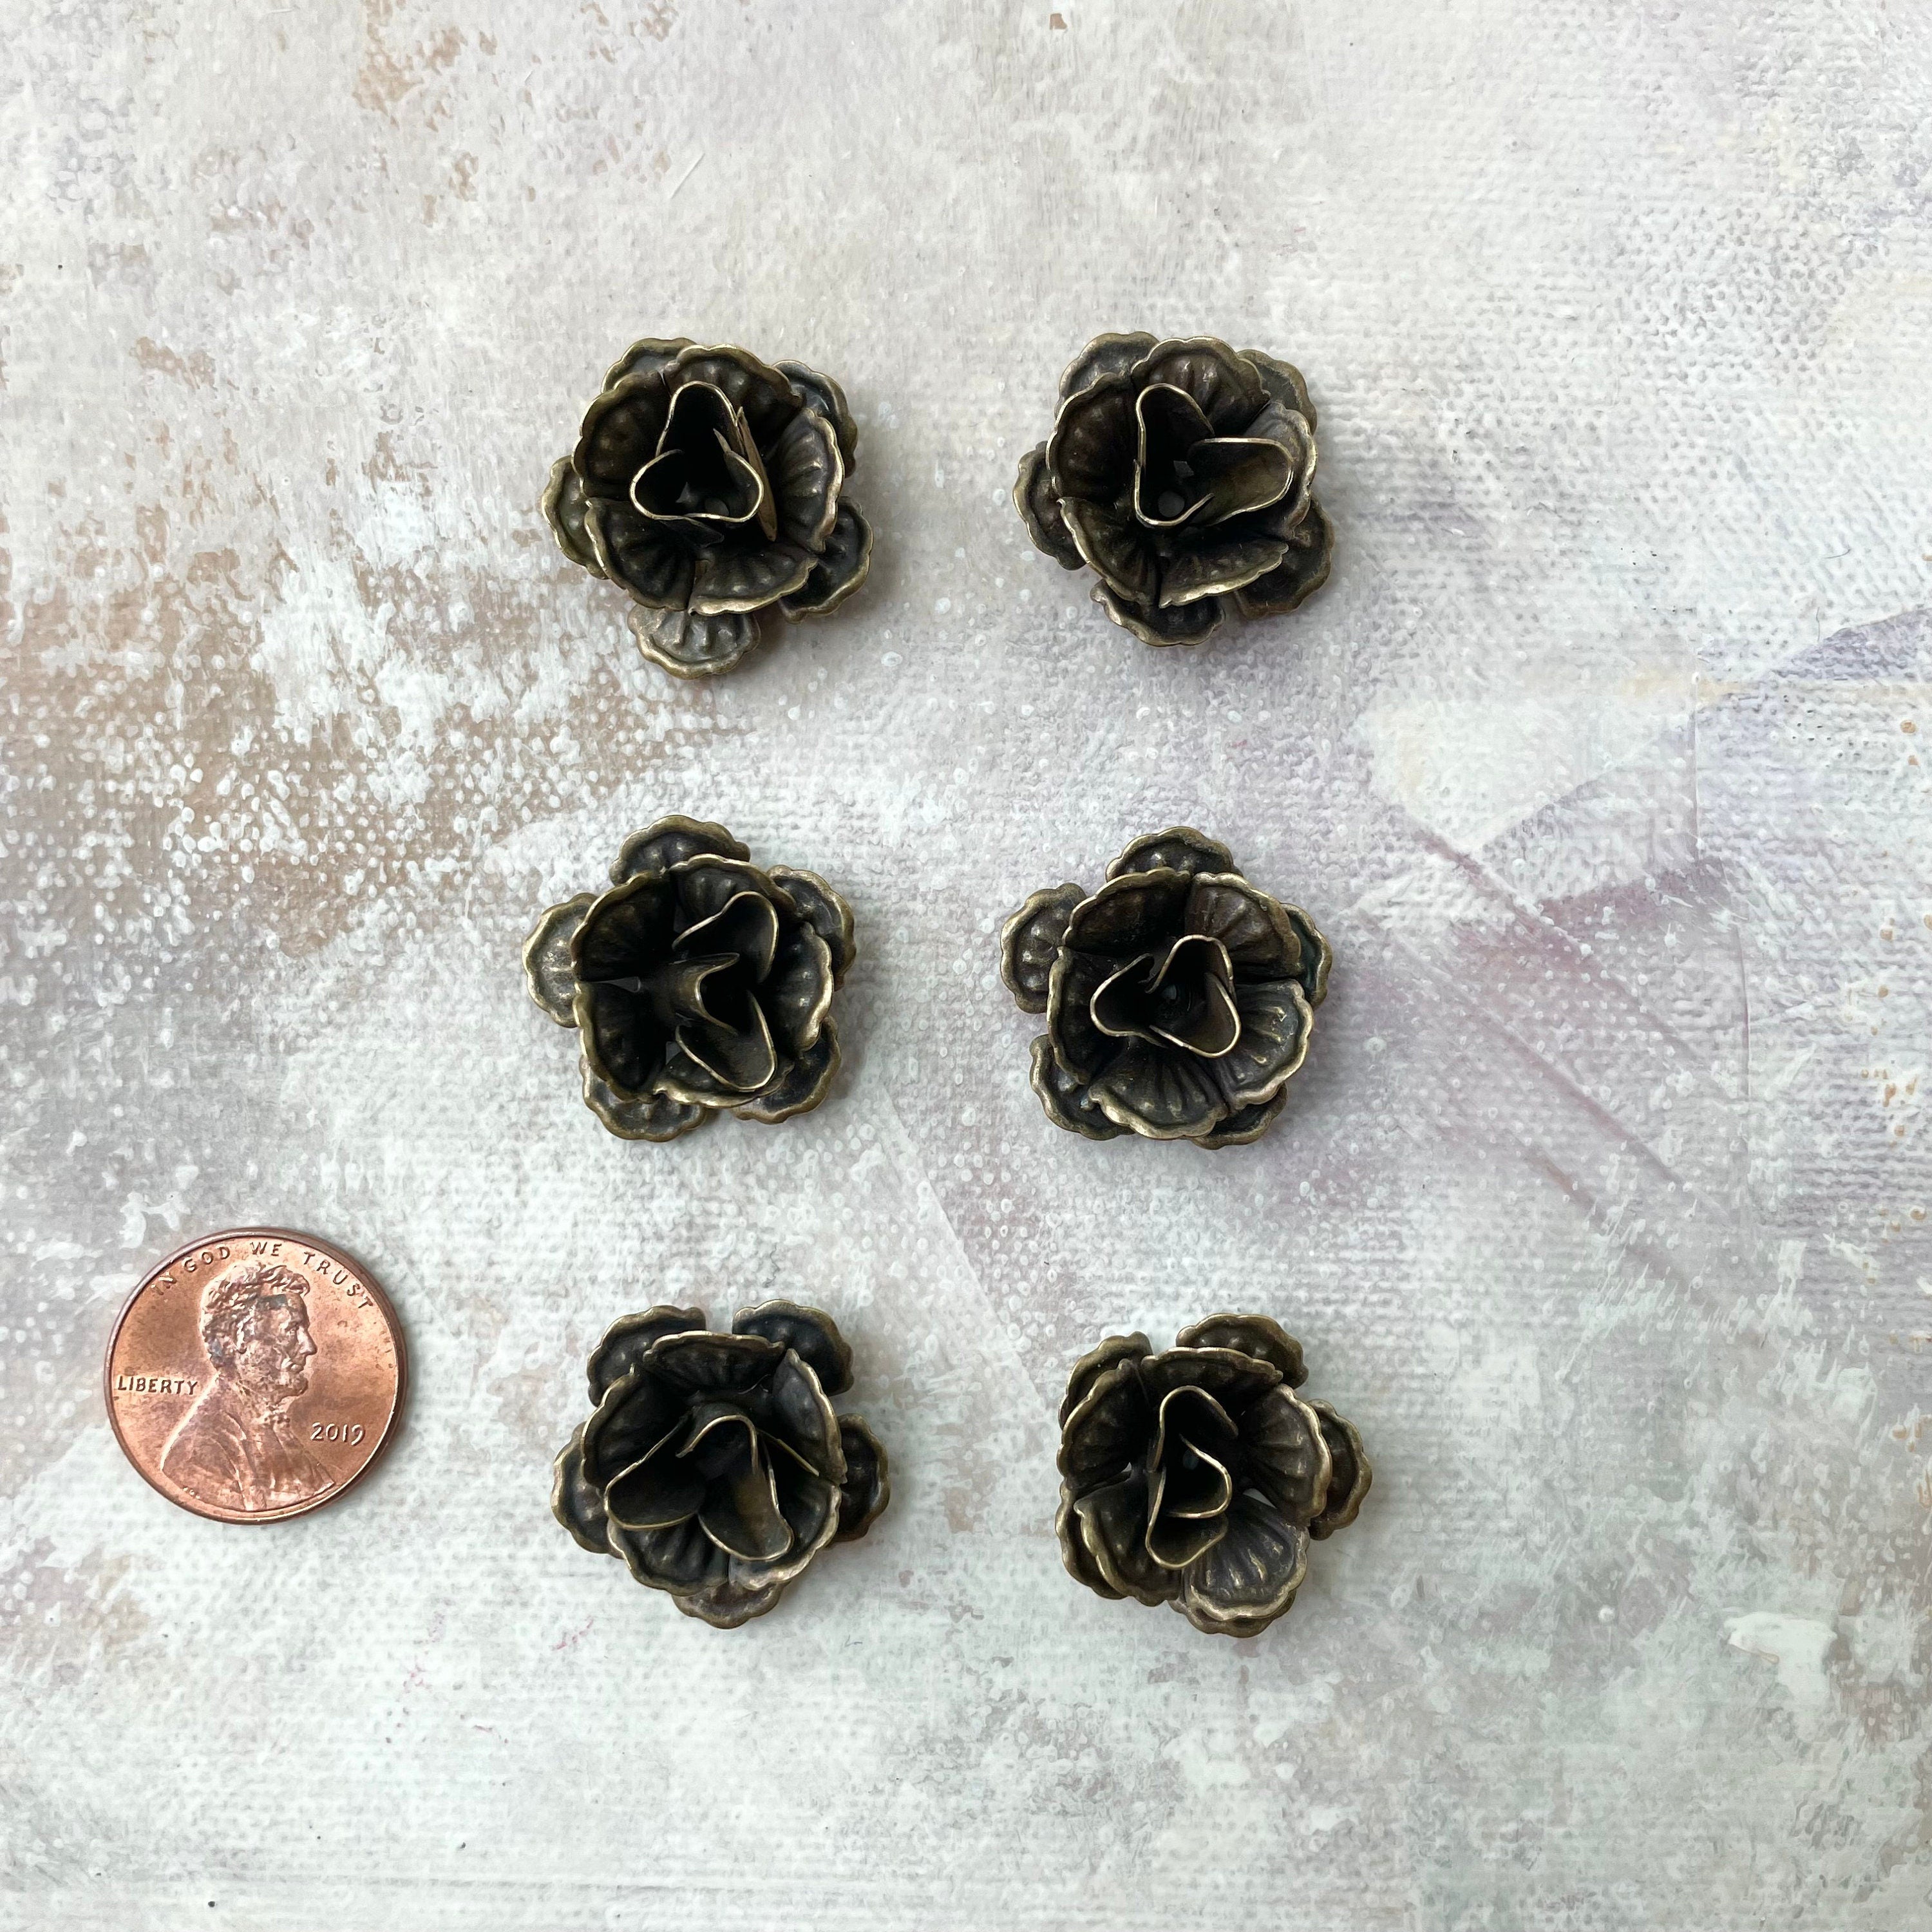 6 mini bronze styling flowers with penny beside for size reference - Flat lay props from Champagne & GRIT